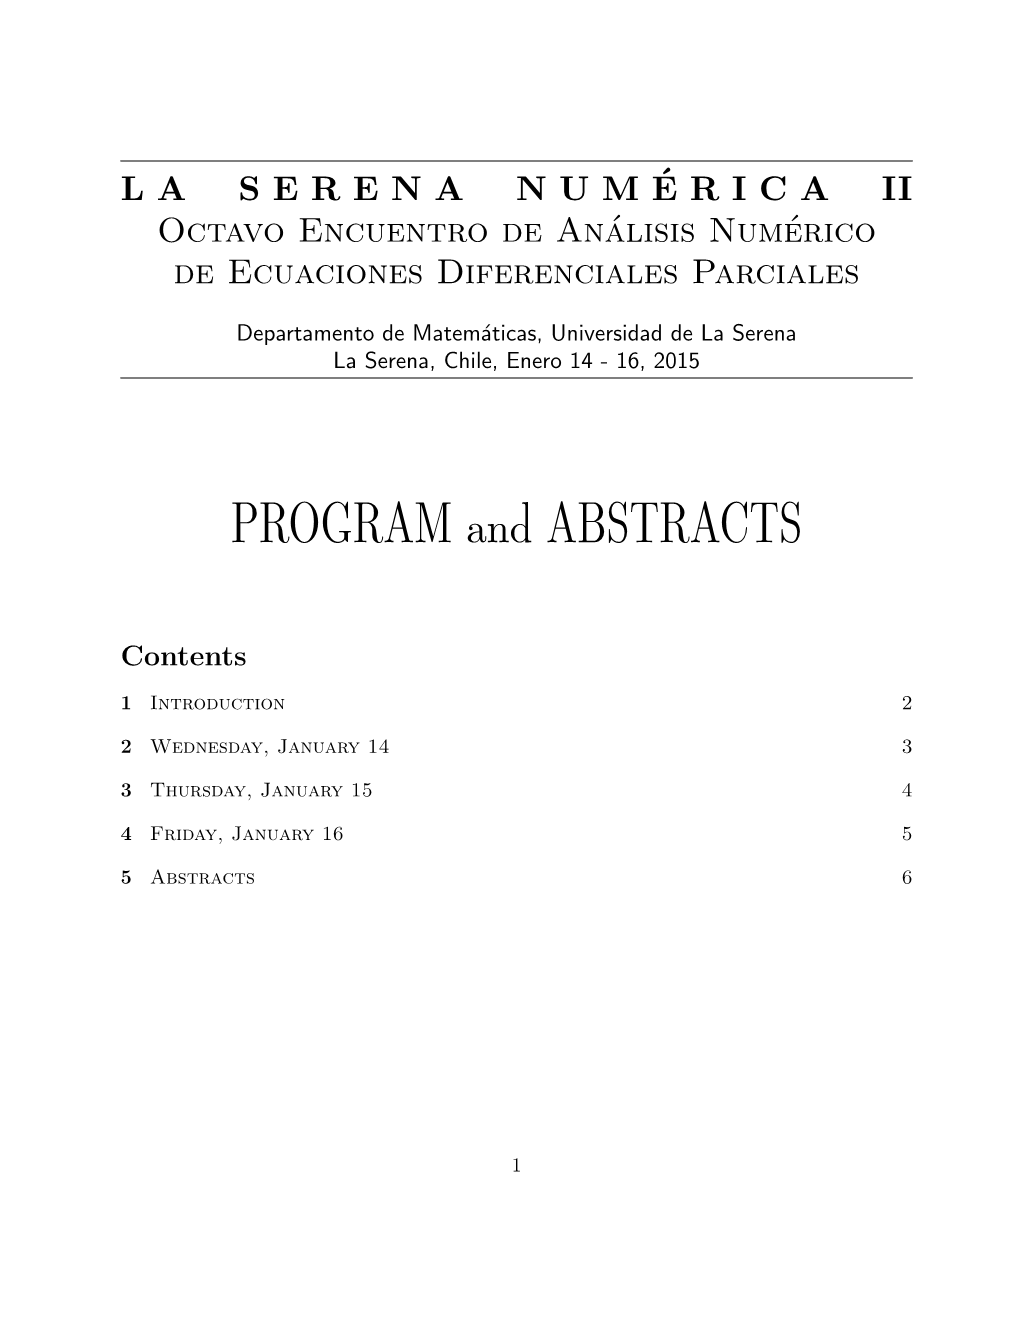 PROGRAM and ABSTRACTS